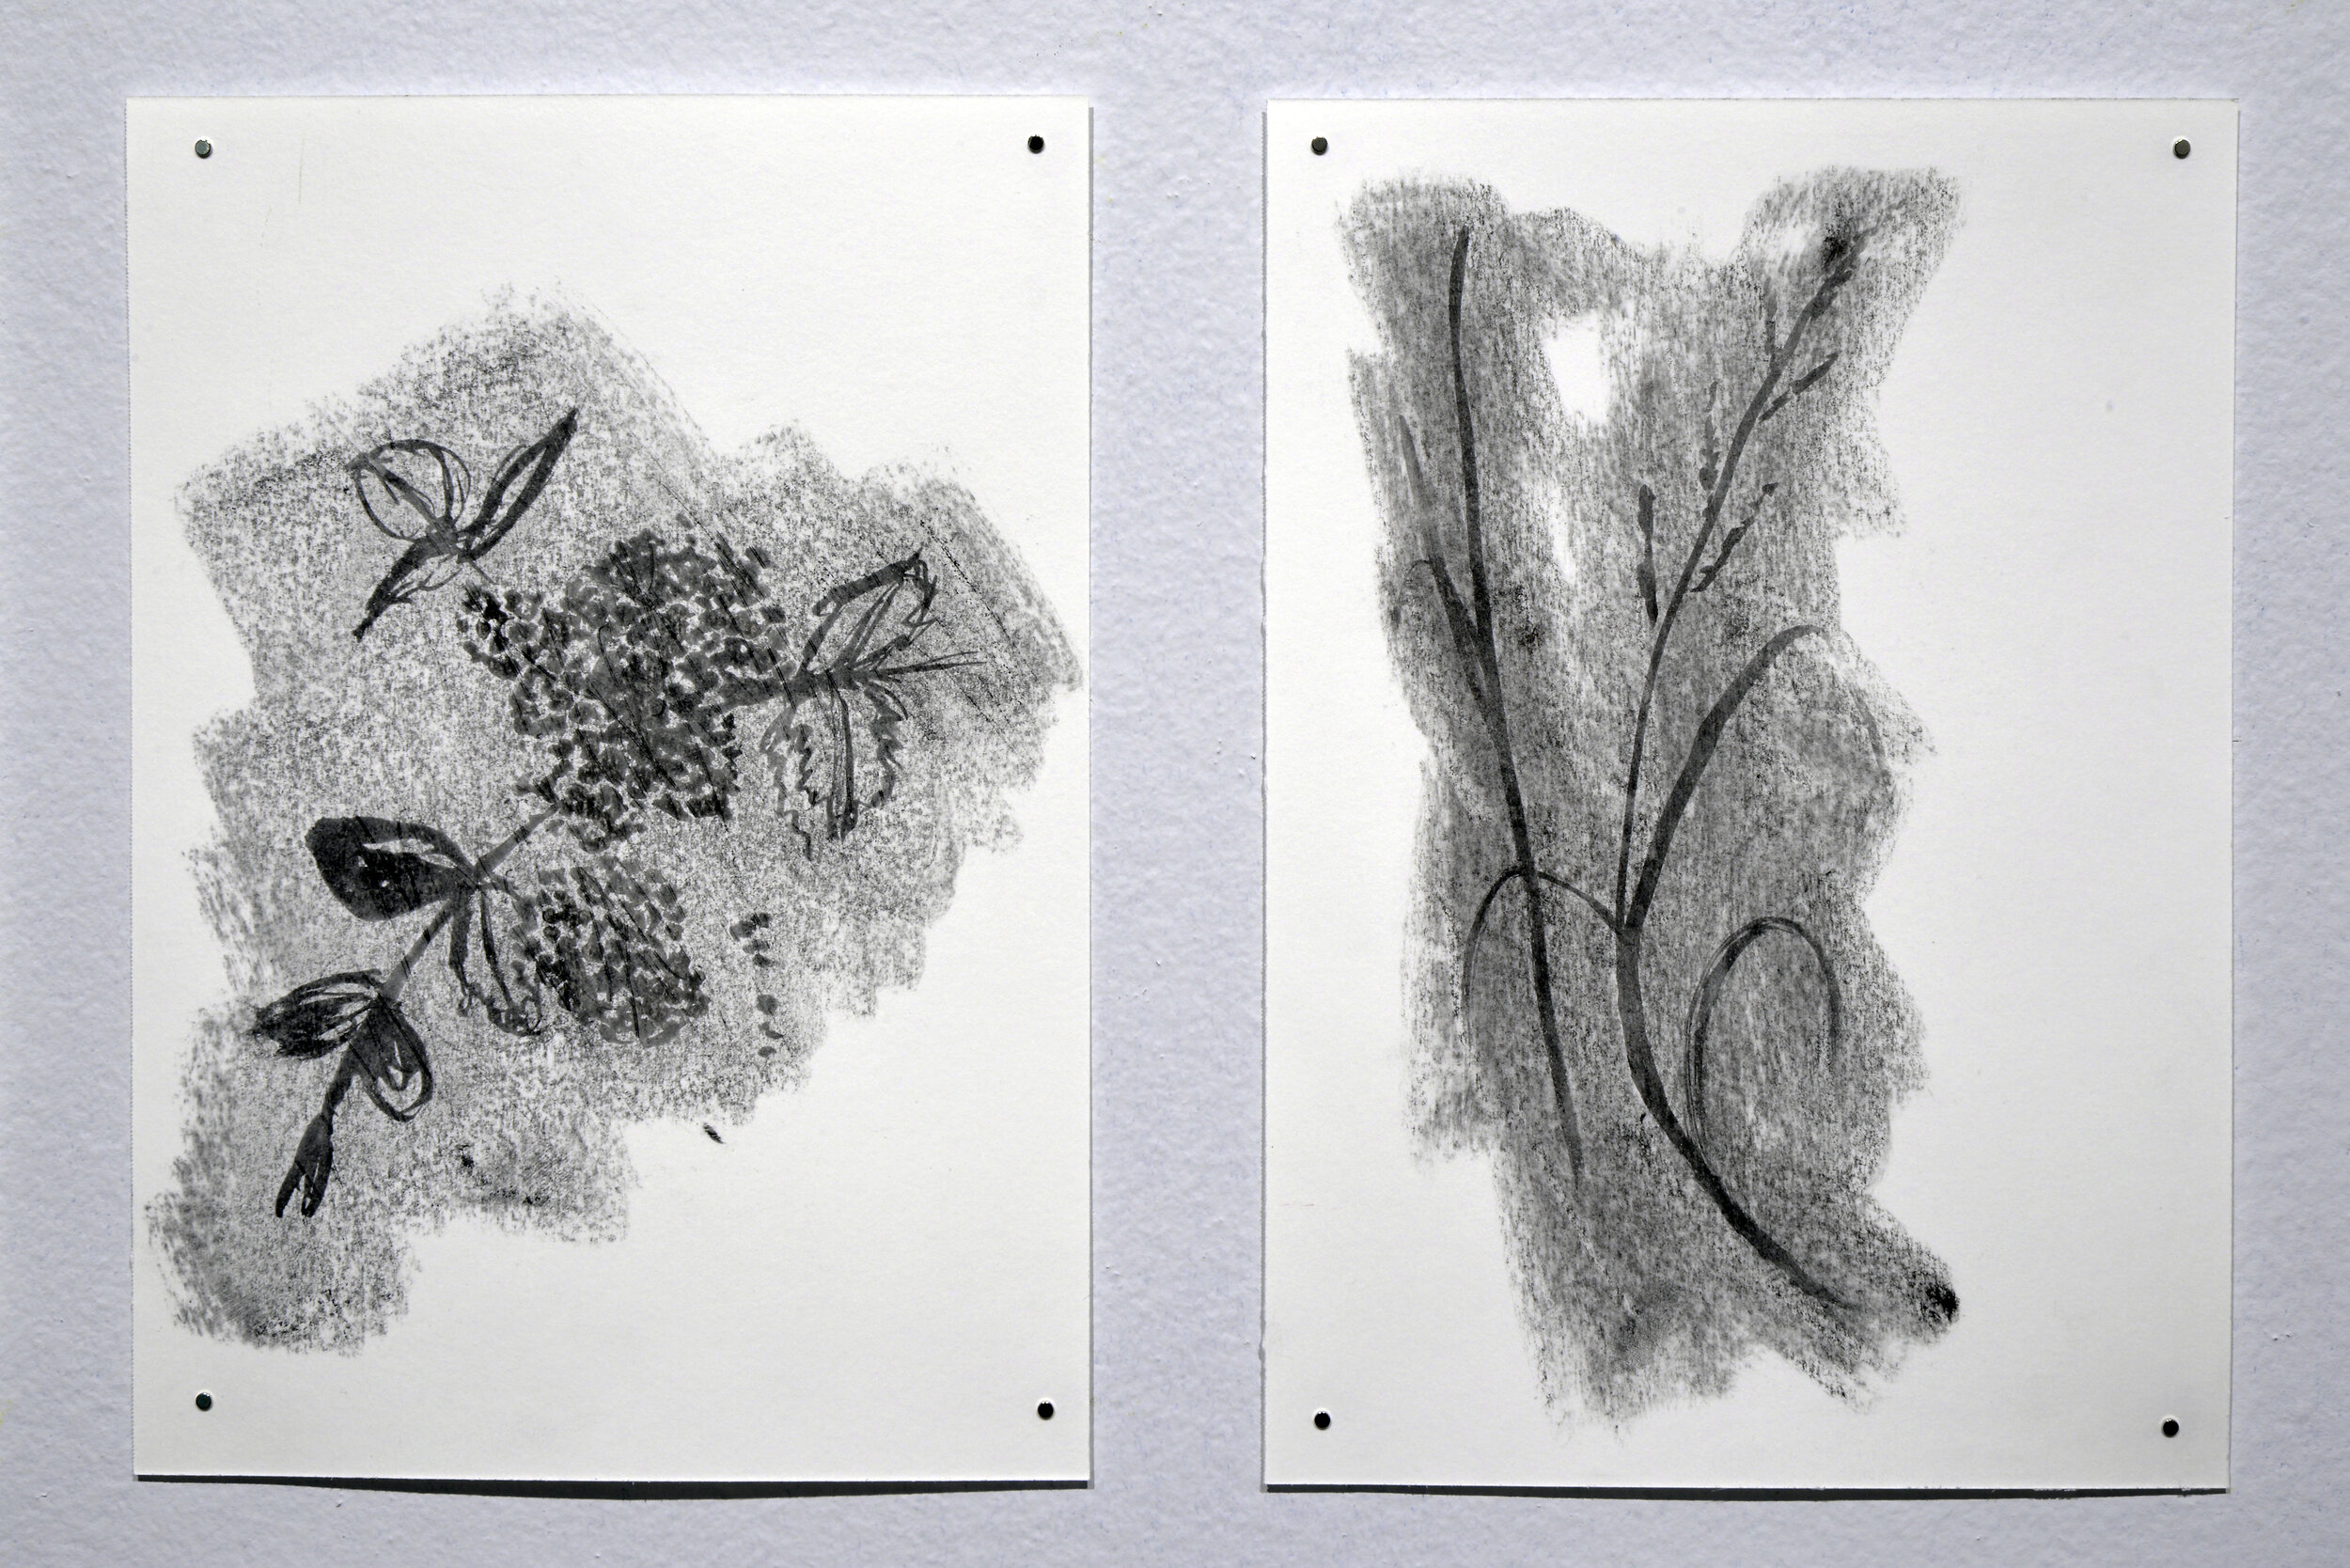  Alana Bartol,  Plants of Grassy Mountain (detail),  2020, original drawings, charcoal and milk on paper. 